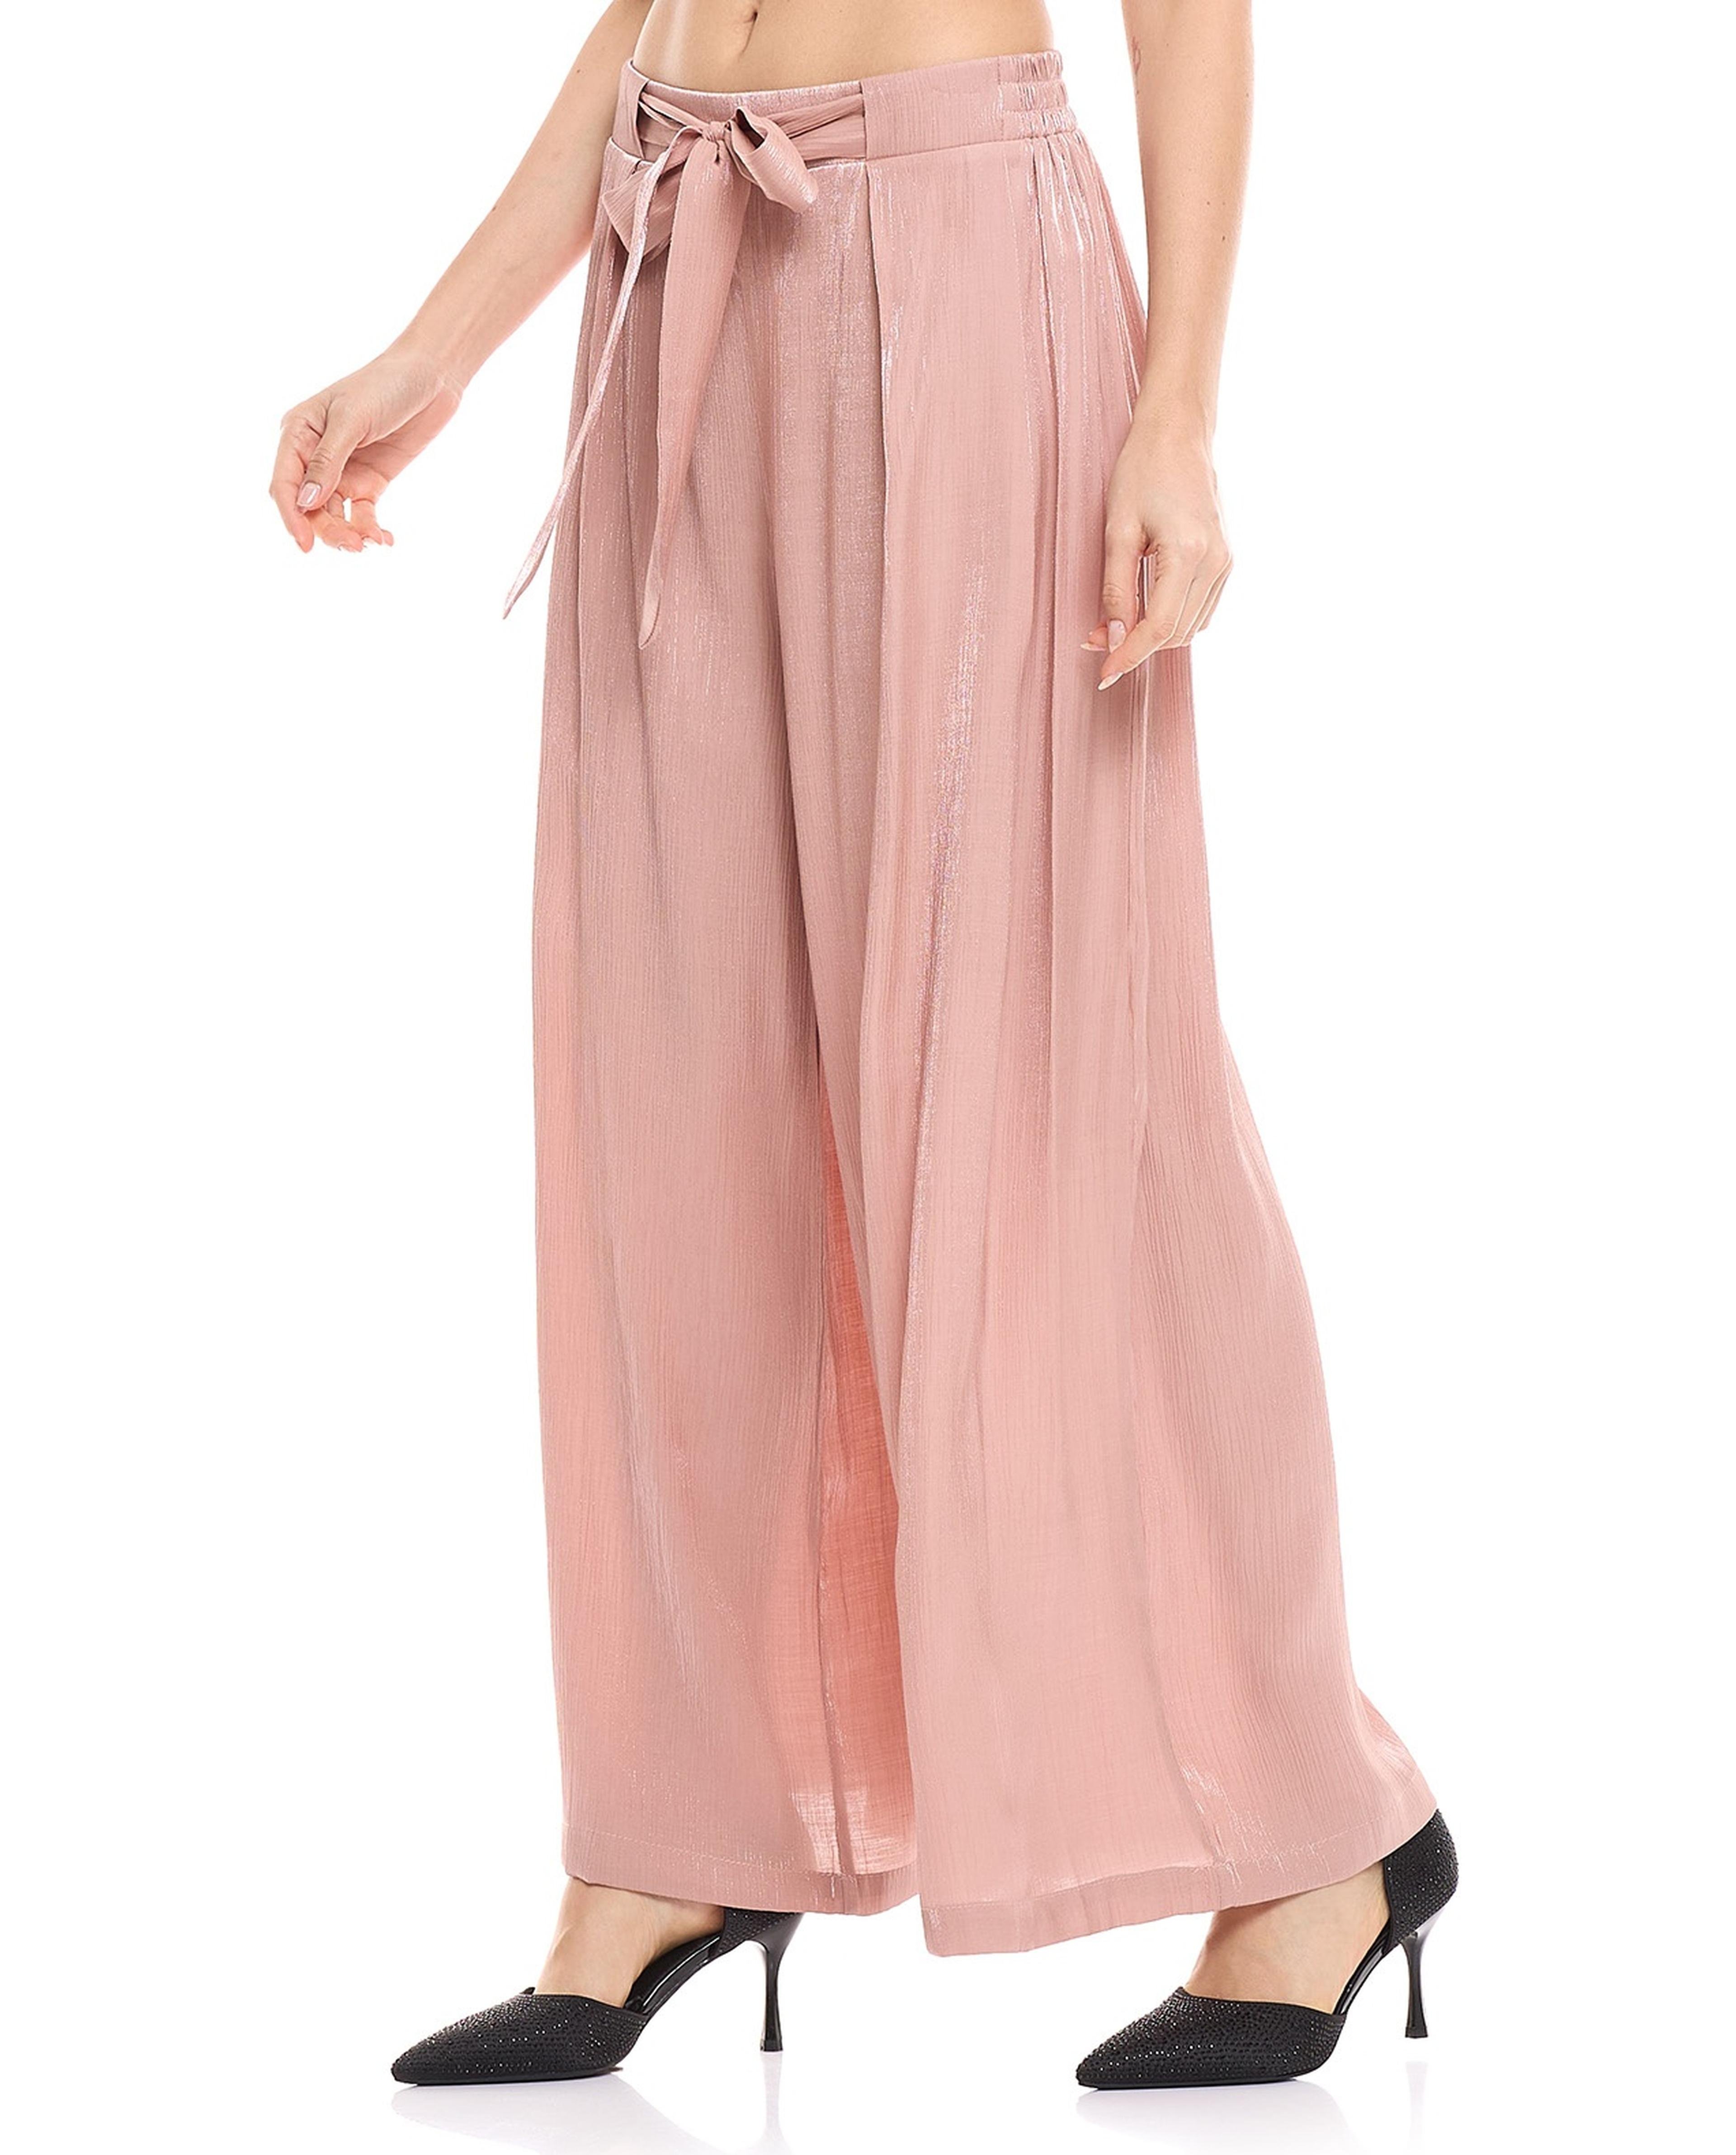 Shimmer Stripes Palazzo Pants with Elastic Waist